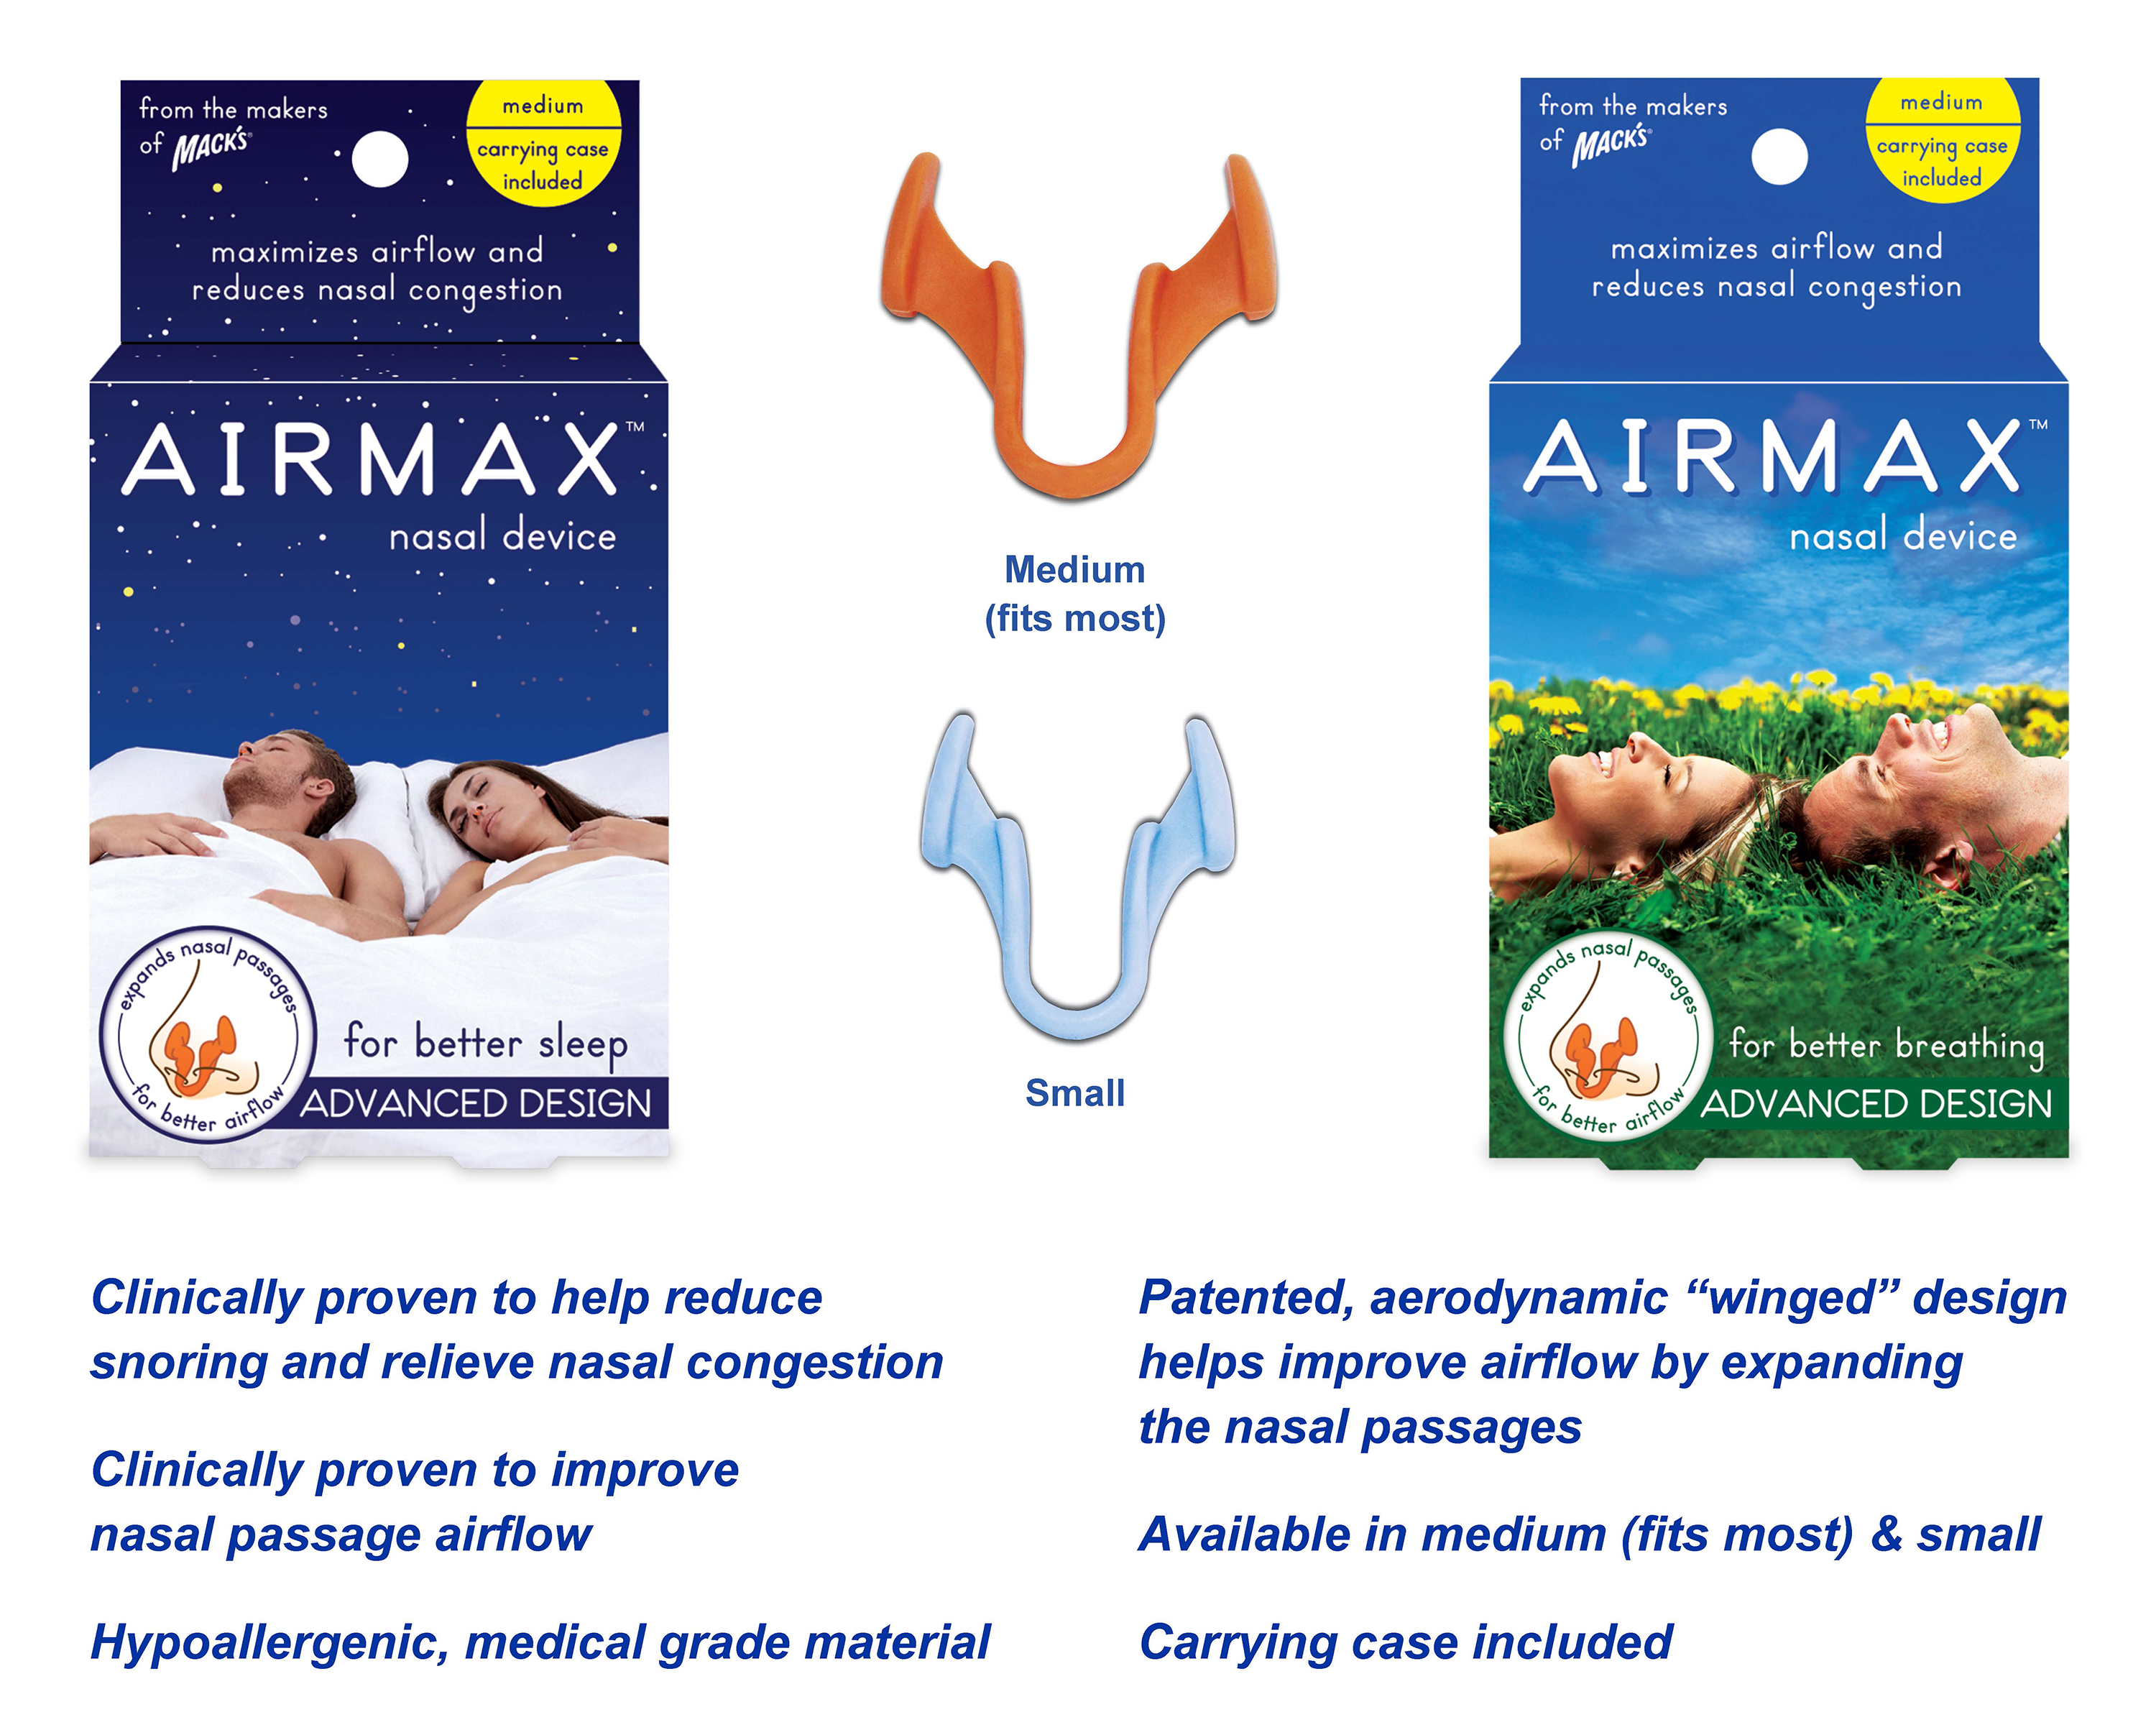 The Airmax™ Nasal Device is important in helping consumers address nasal breathing difficulties and sleep challenges.